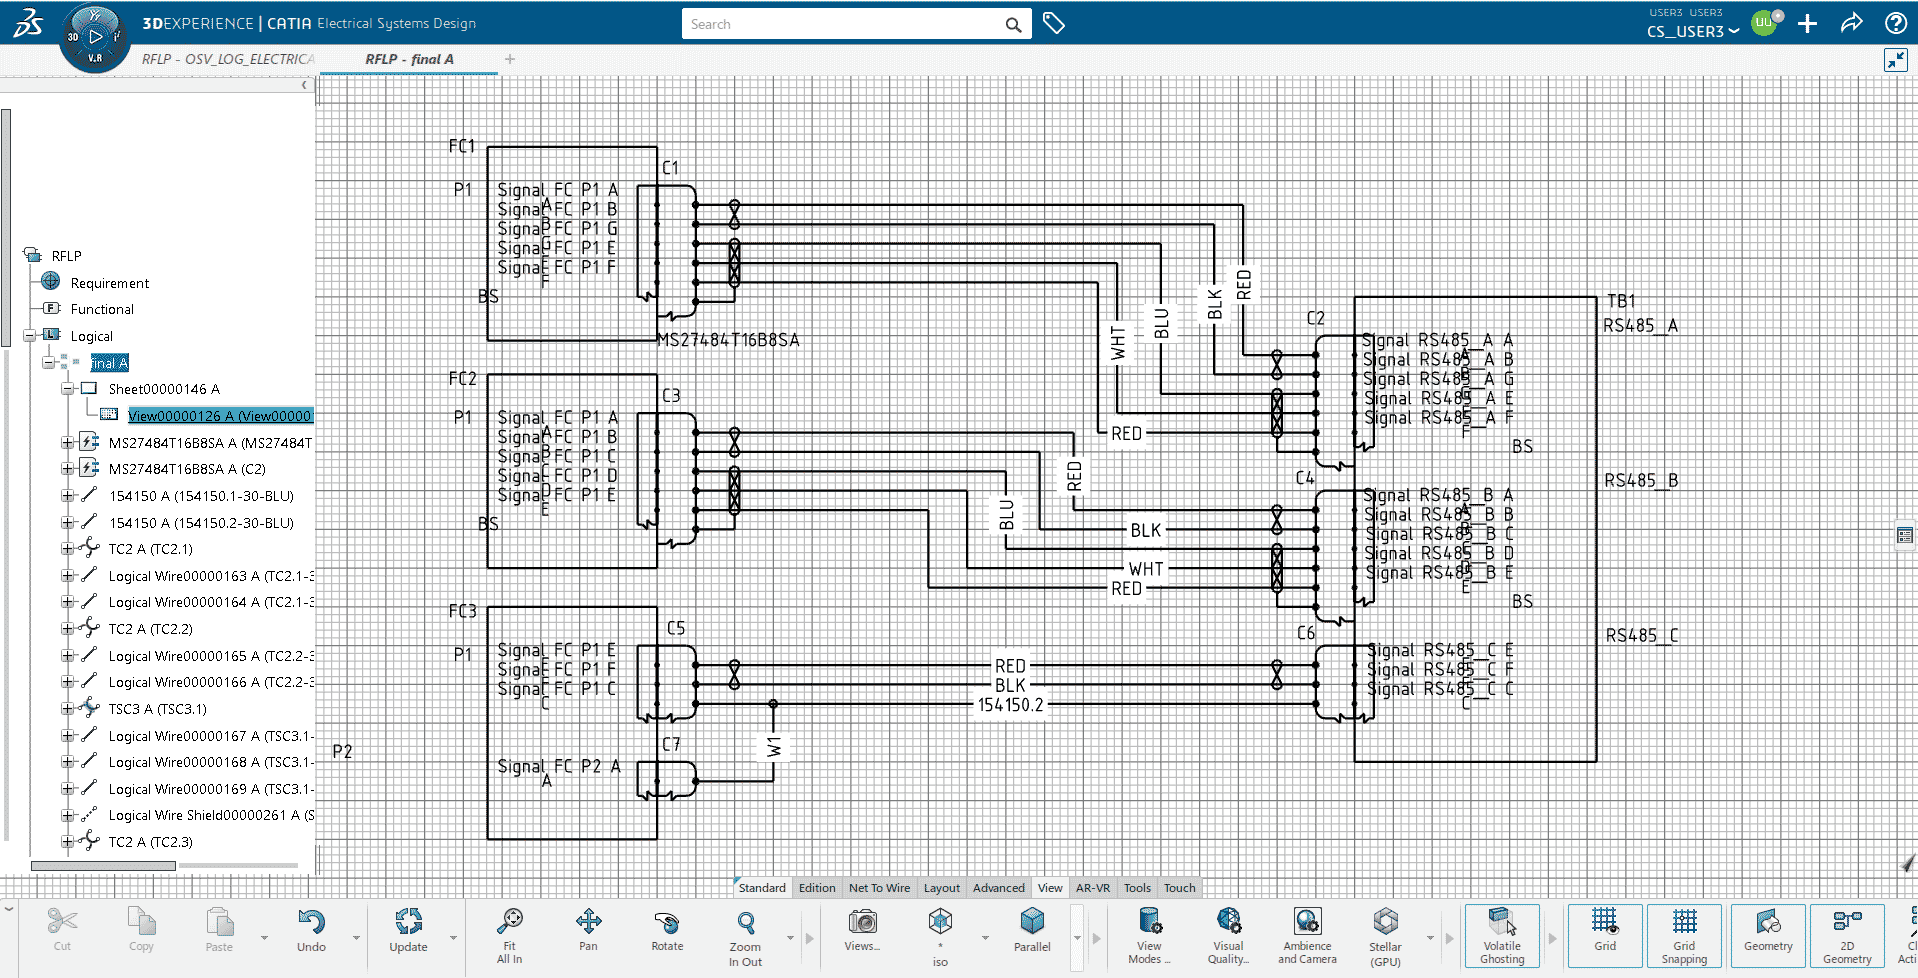 CATIA V6 Electrical 2D design requires the systems schematic engineer role.